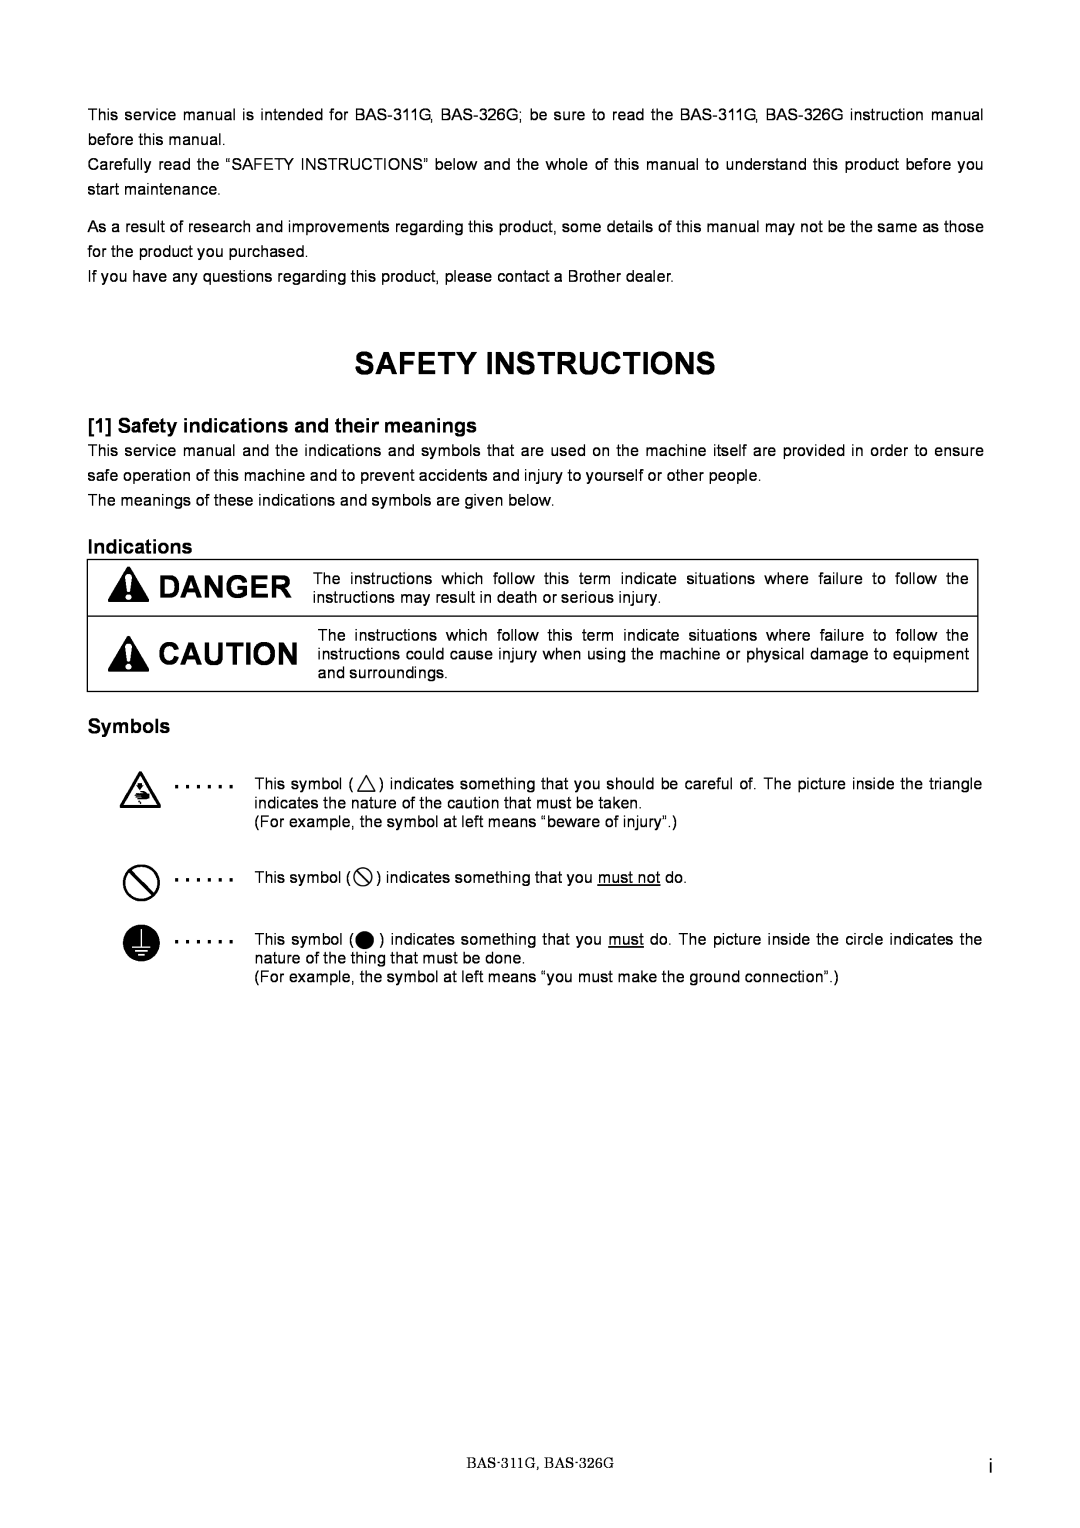 Brother BAS-311G Safety Instructions, Safety indications and their meanings, Indications, Symbols, ･･････ ･･････ ･･････ 